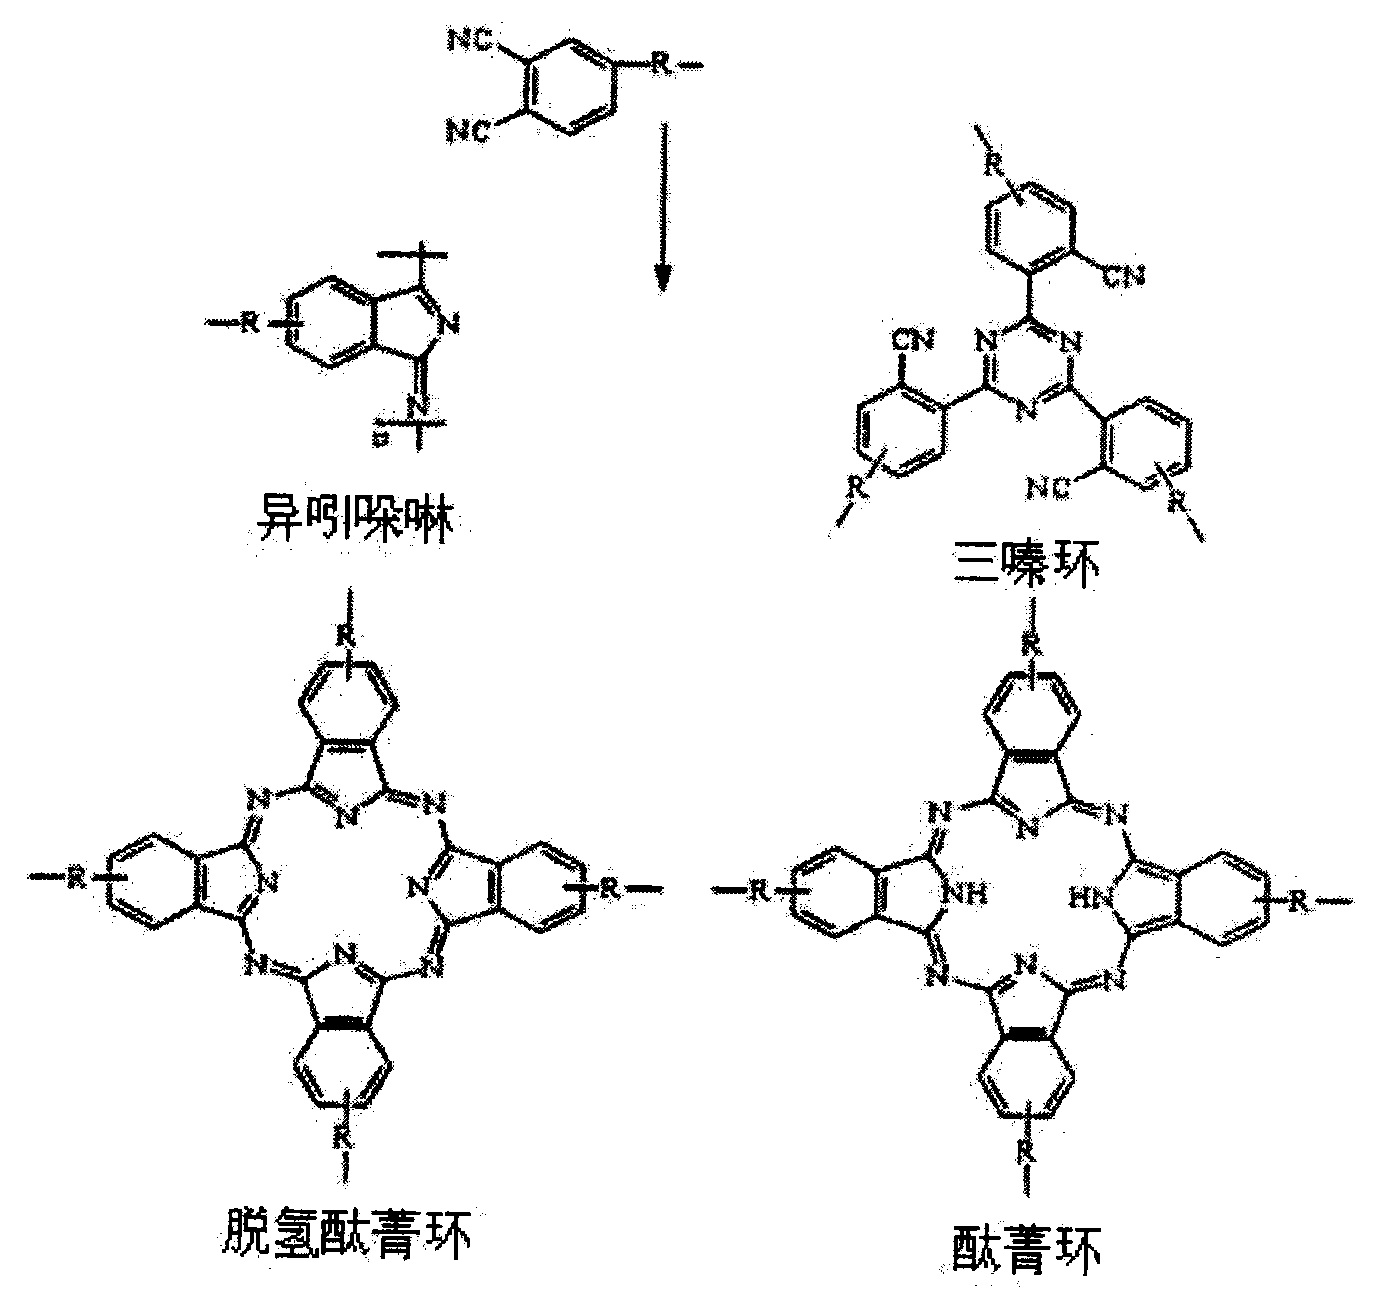 Pyrrole aromatic diamine containing phthalic nitrile structure as well as preparation method and application thereof